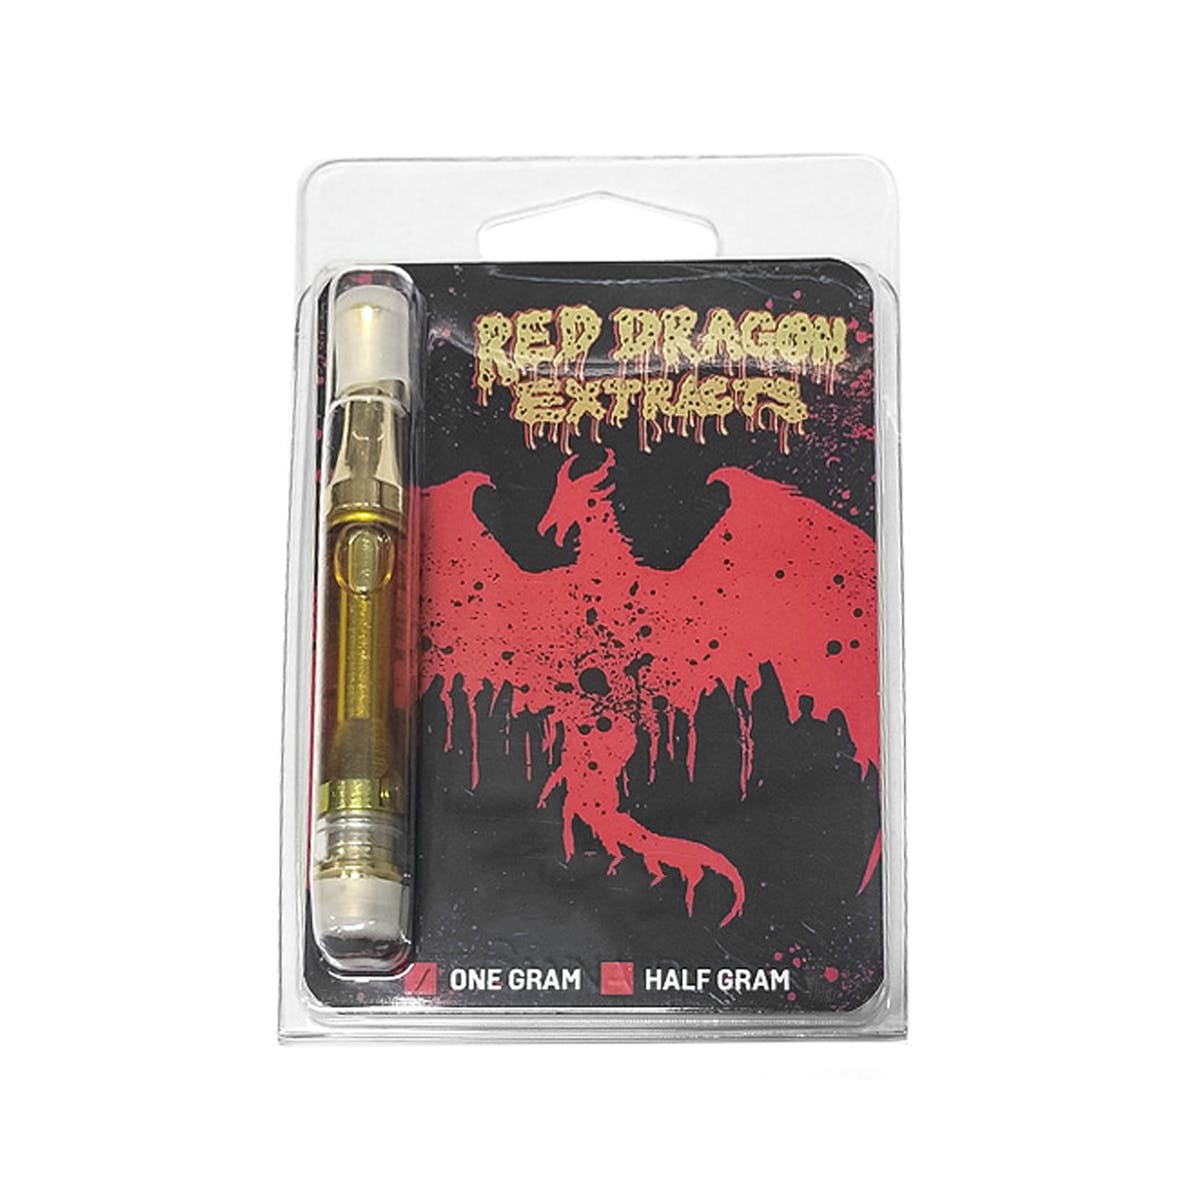 Red Dragon Extracts Distillate Cartridge